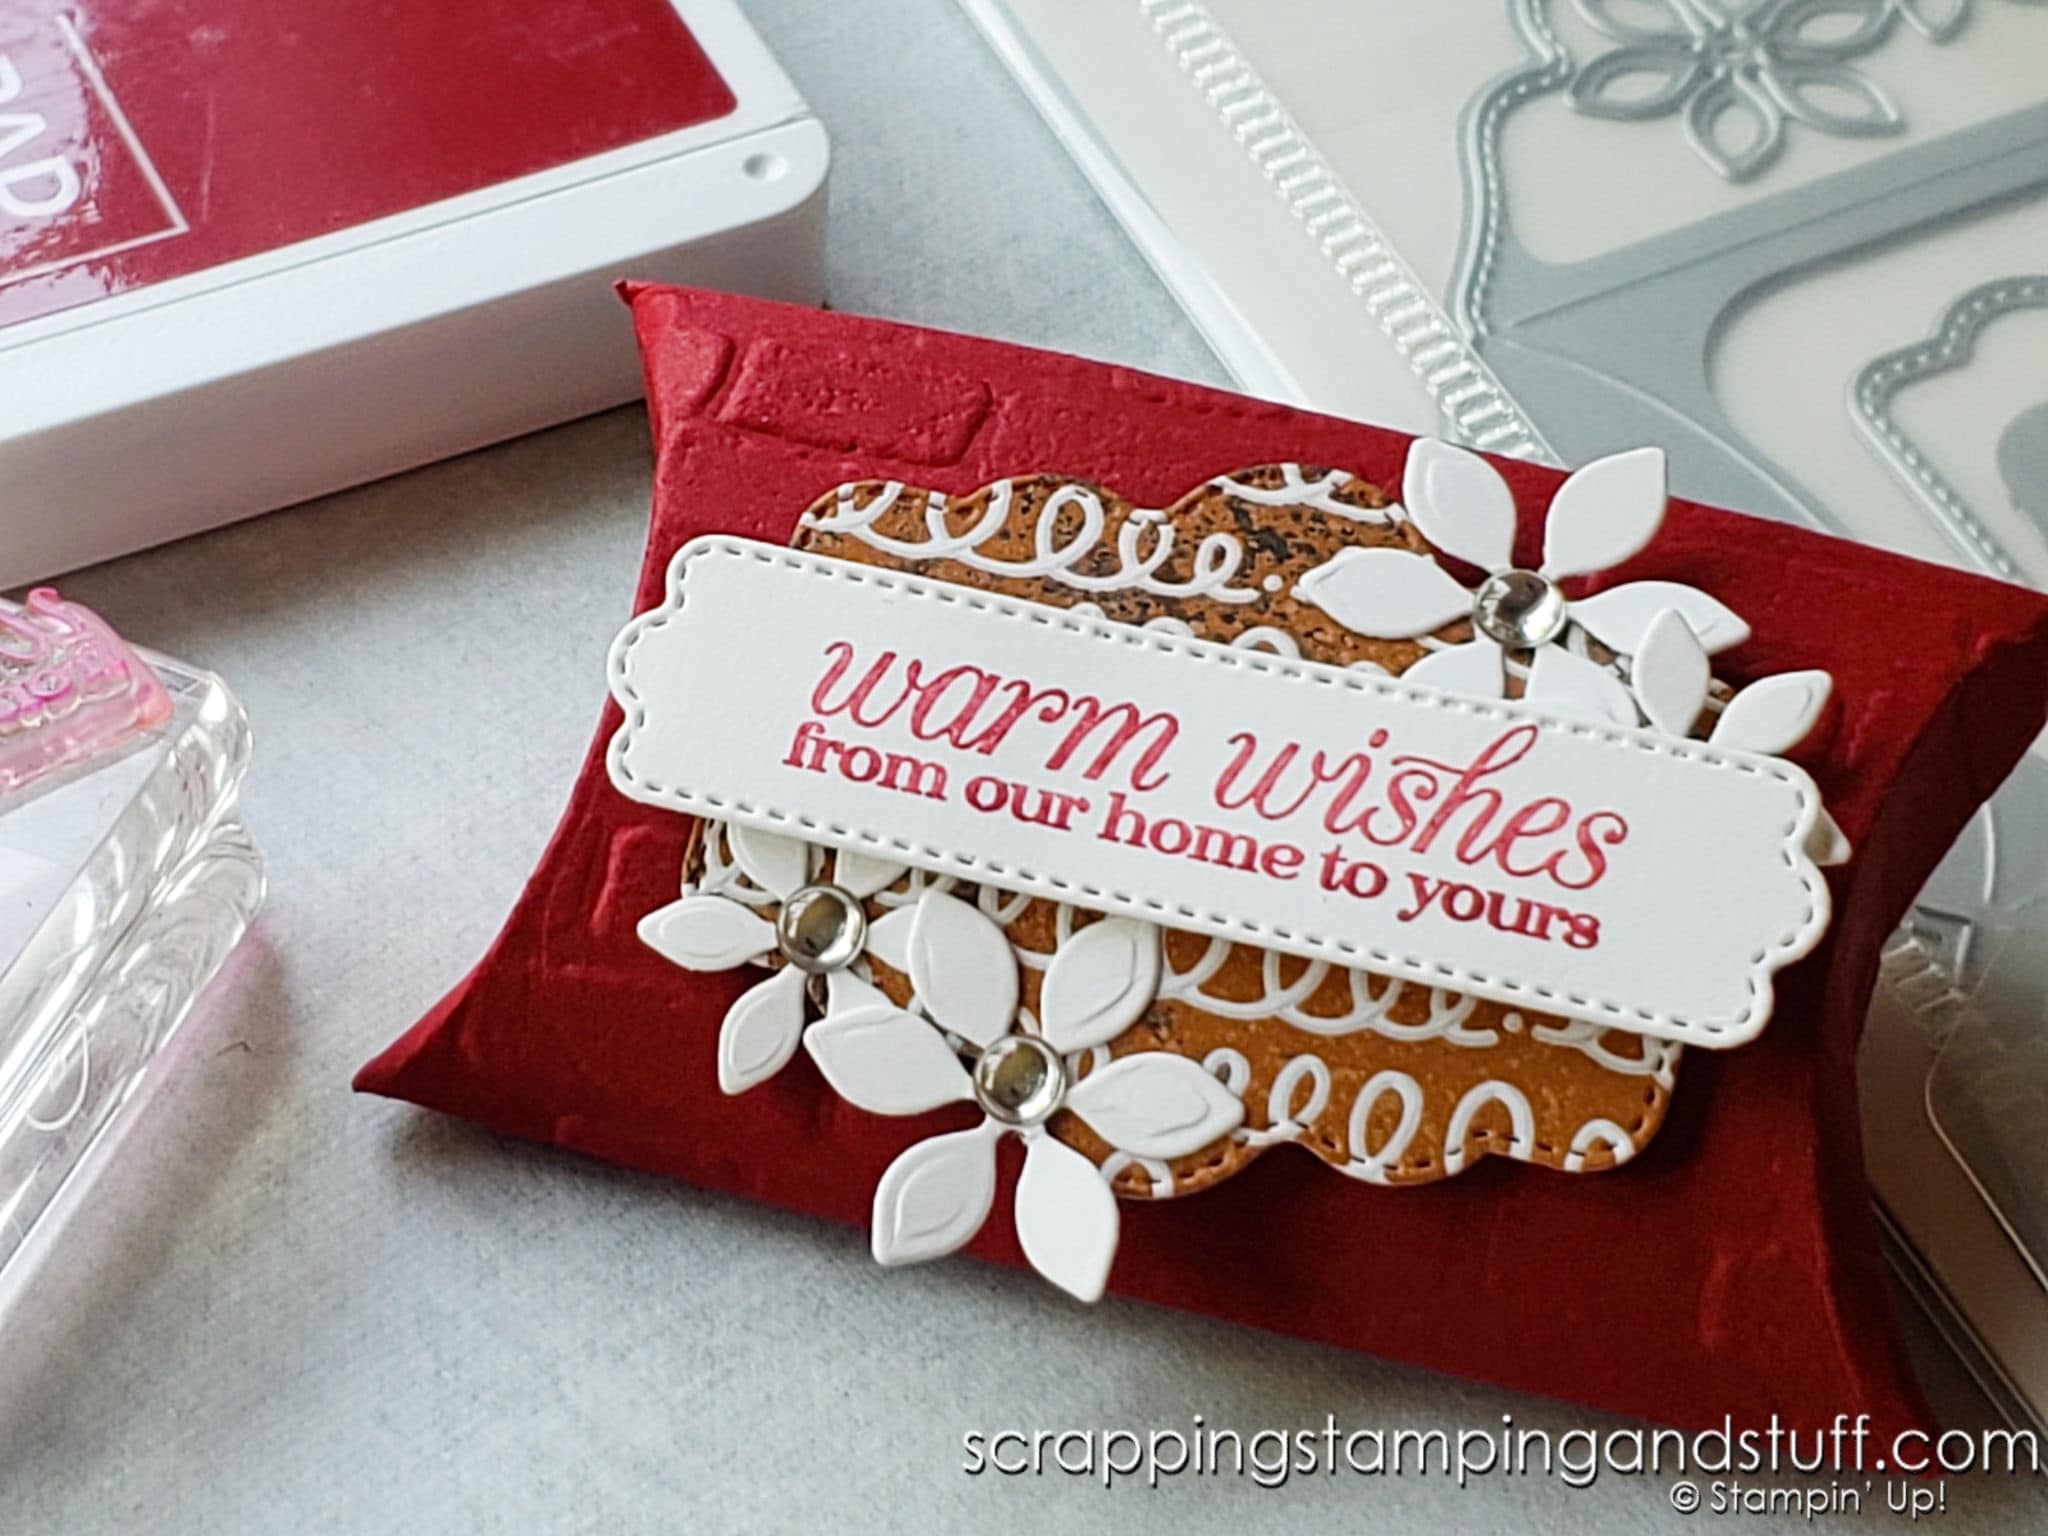 Use The Stampin Up Pretty Pillow Box Dies To Make Adorable Gift Boxes!